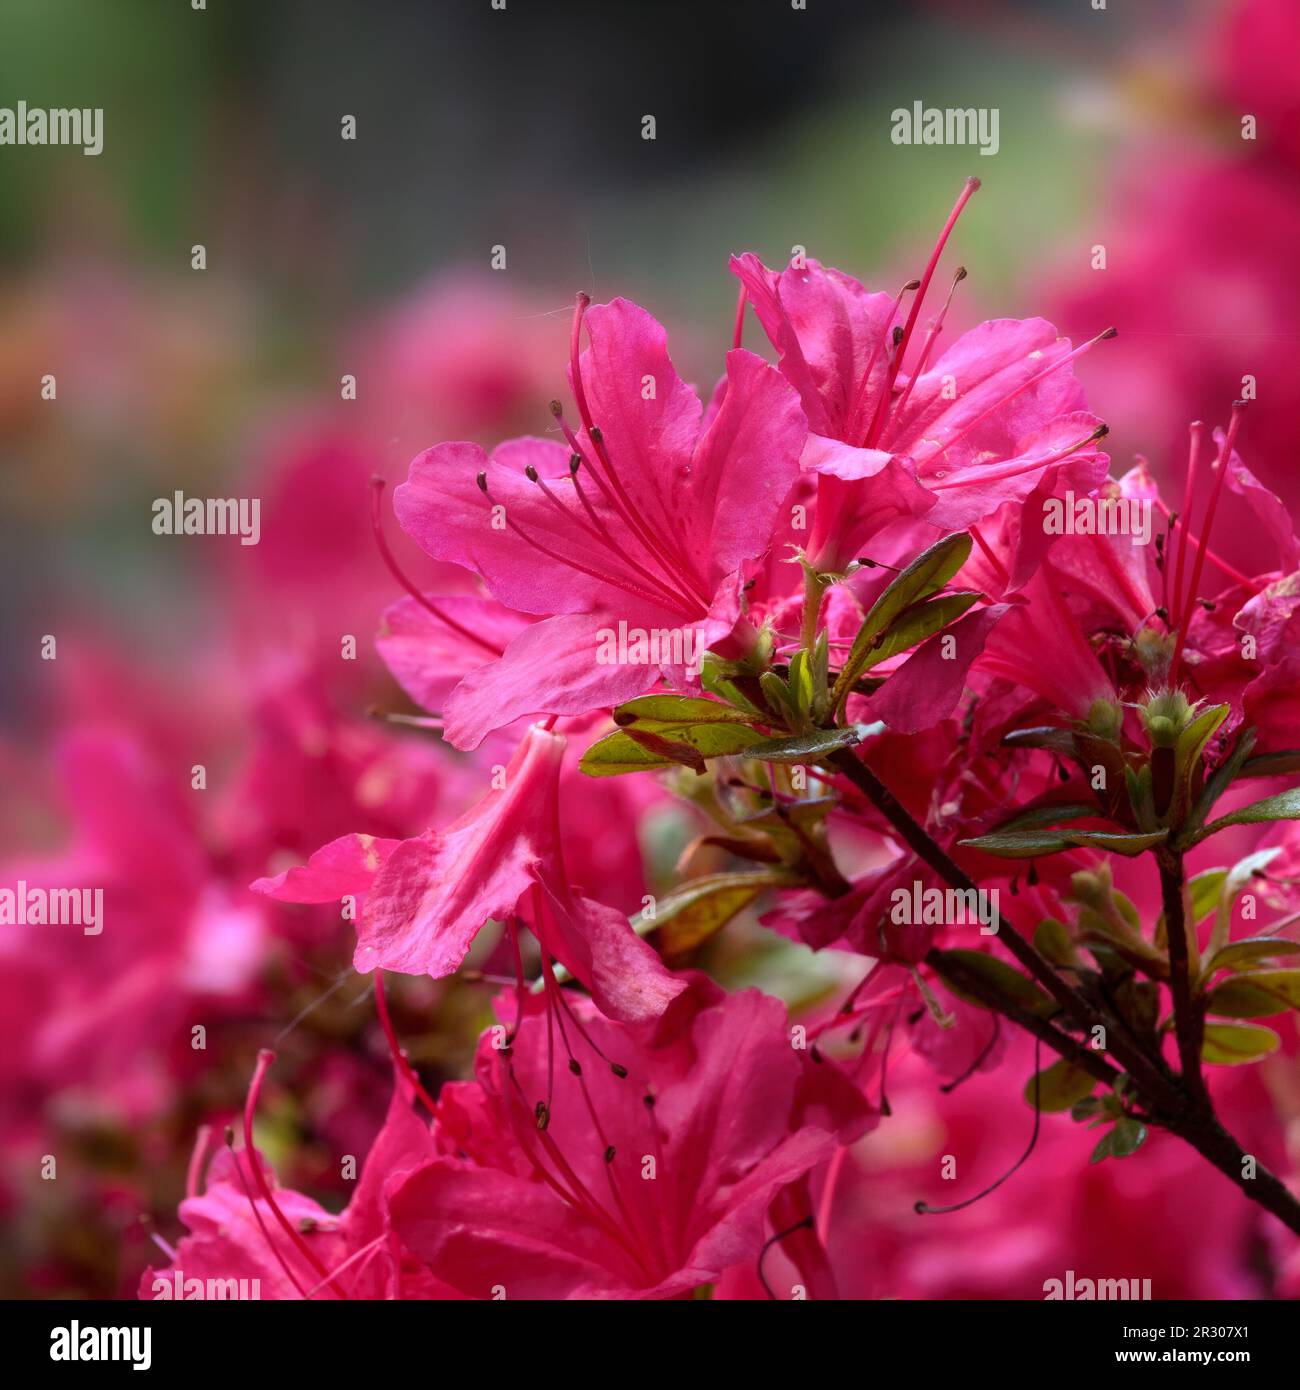 Closeup of flowers of Rhododendron 'Ima-shojo' in a garden in Spring Stock Photo